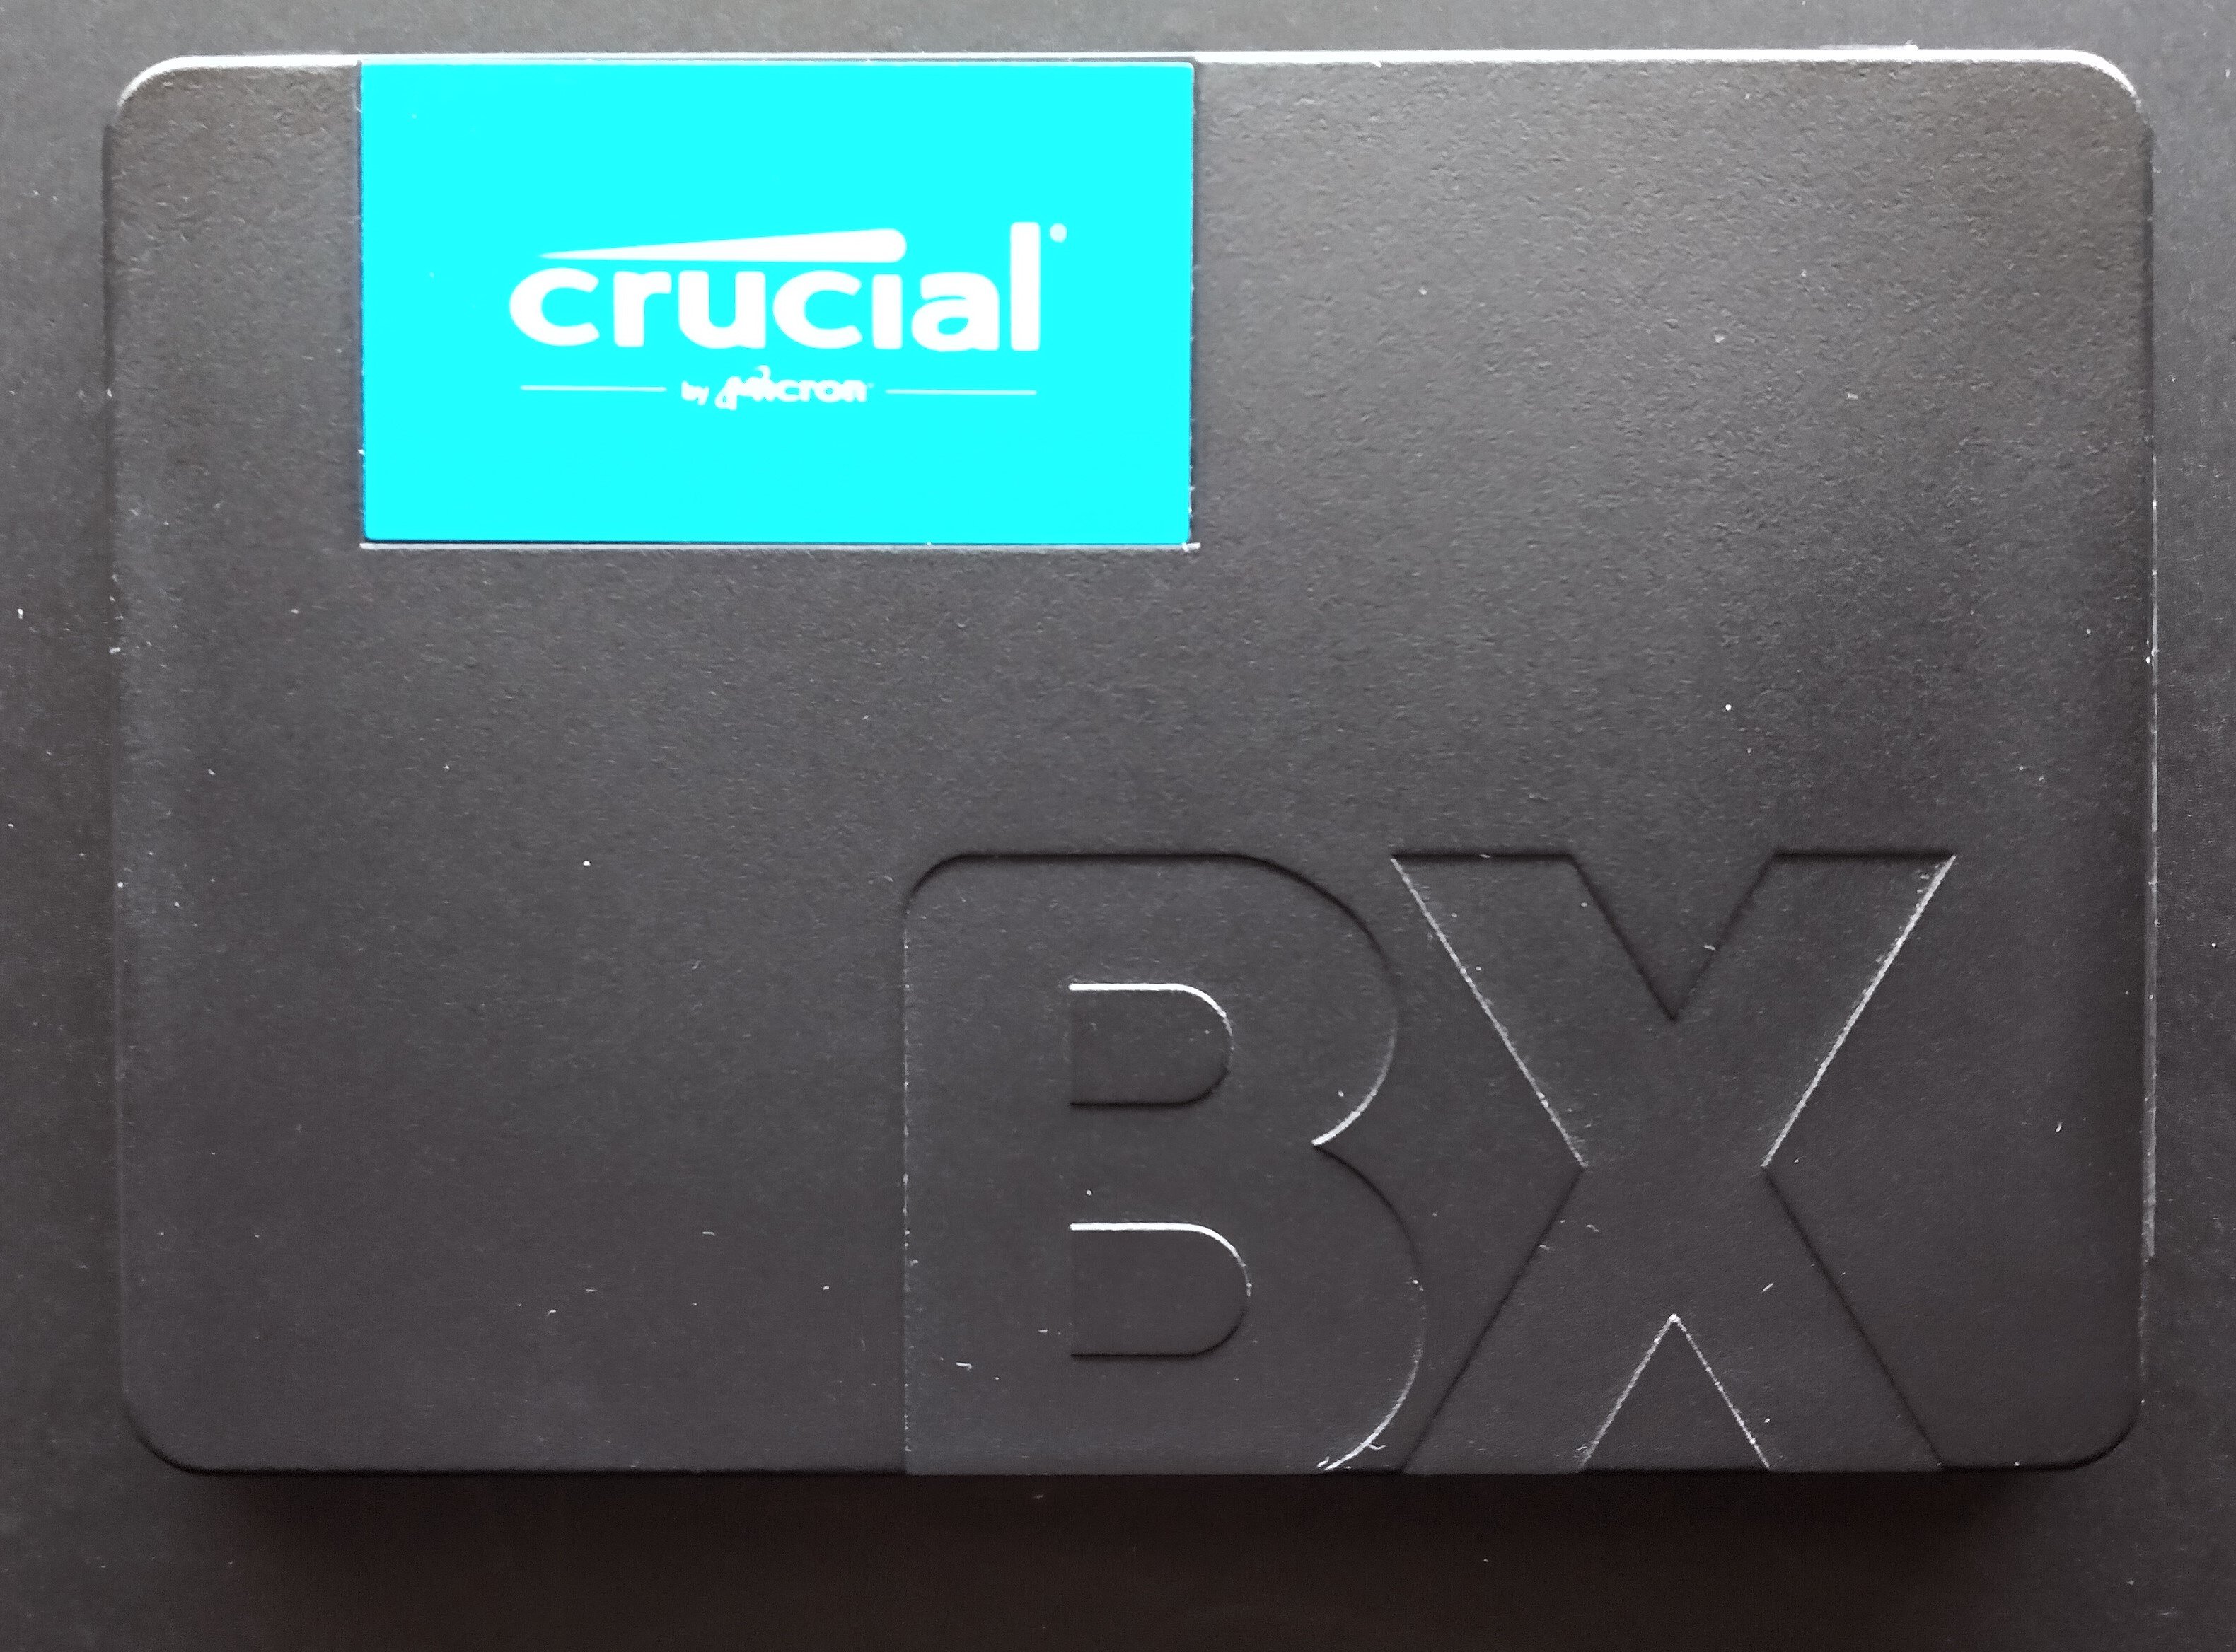 More information about "Crucial BX500 1TB - SATA3 SSD"